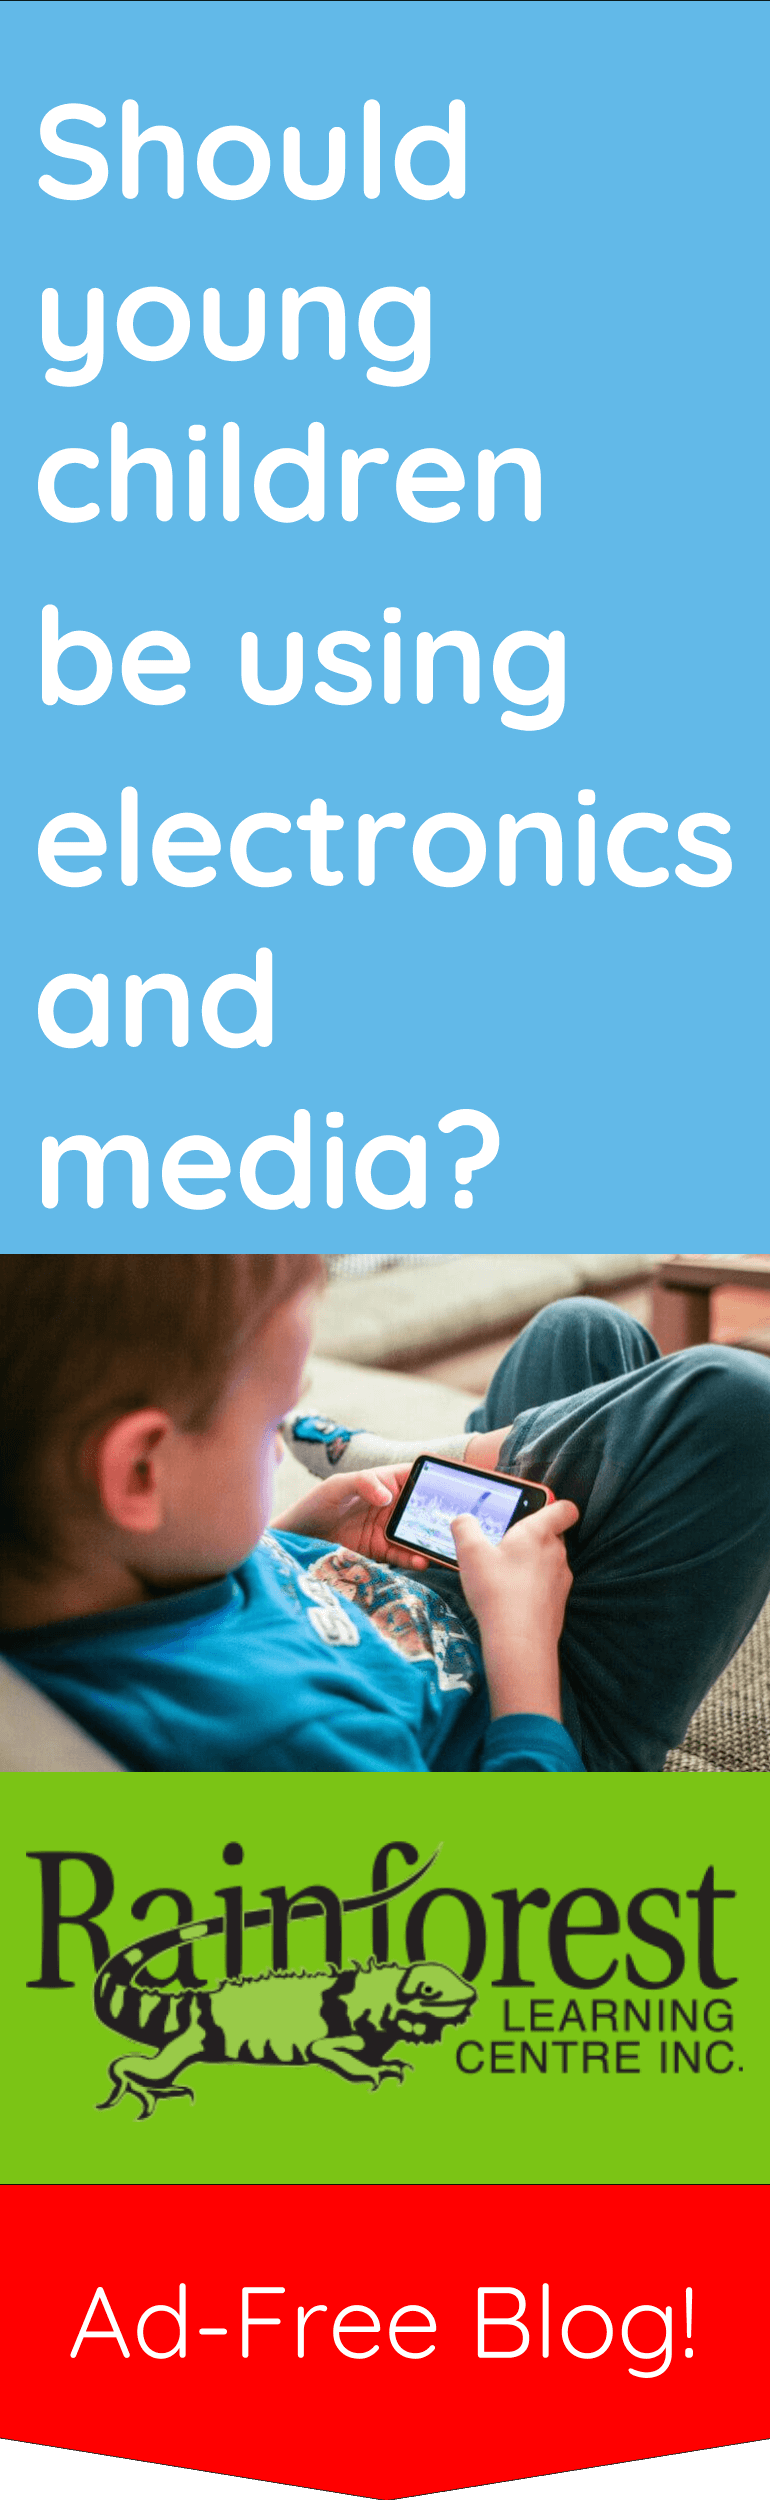 child using device - young children using electronics and media article - pinterest image